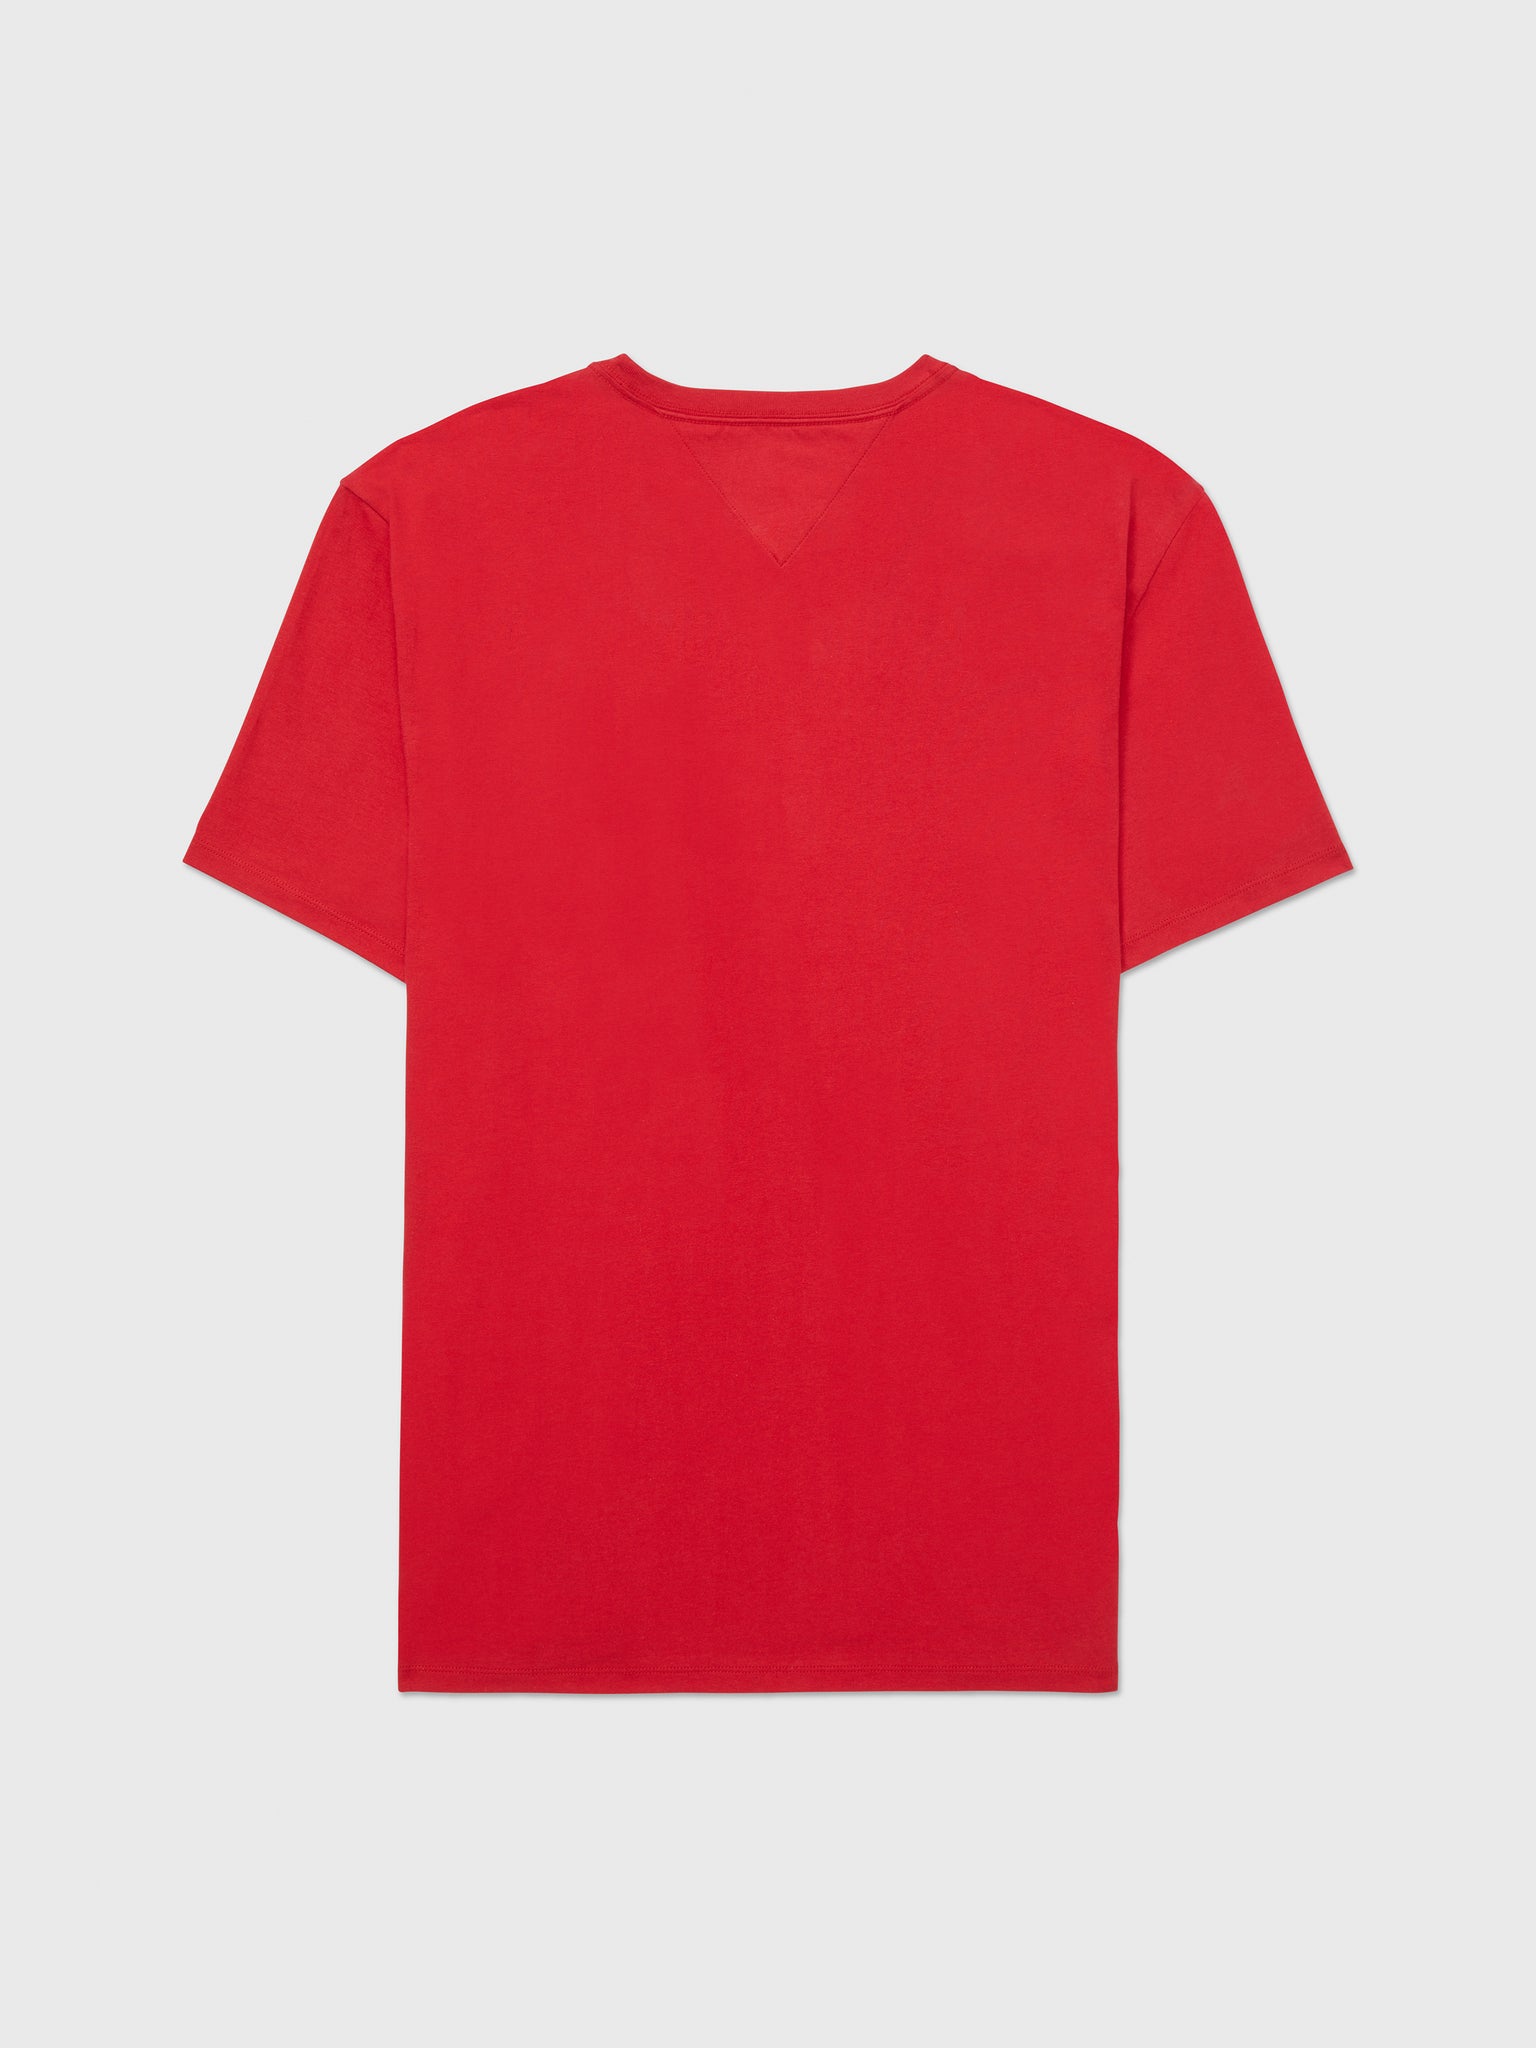 Founders Tee (Mens) - Primary Red